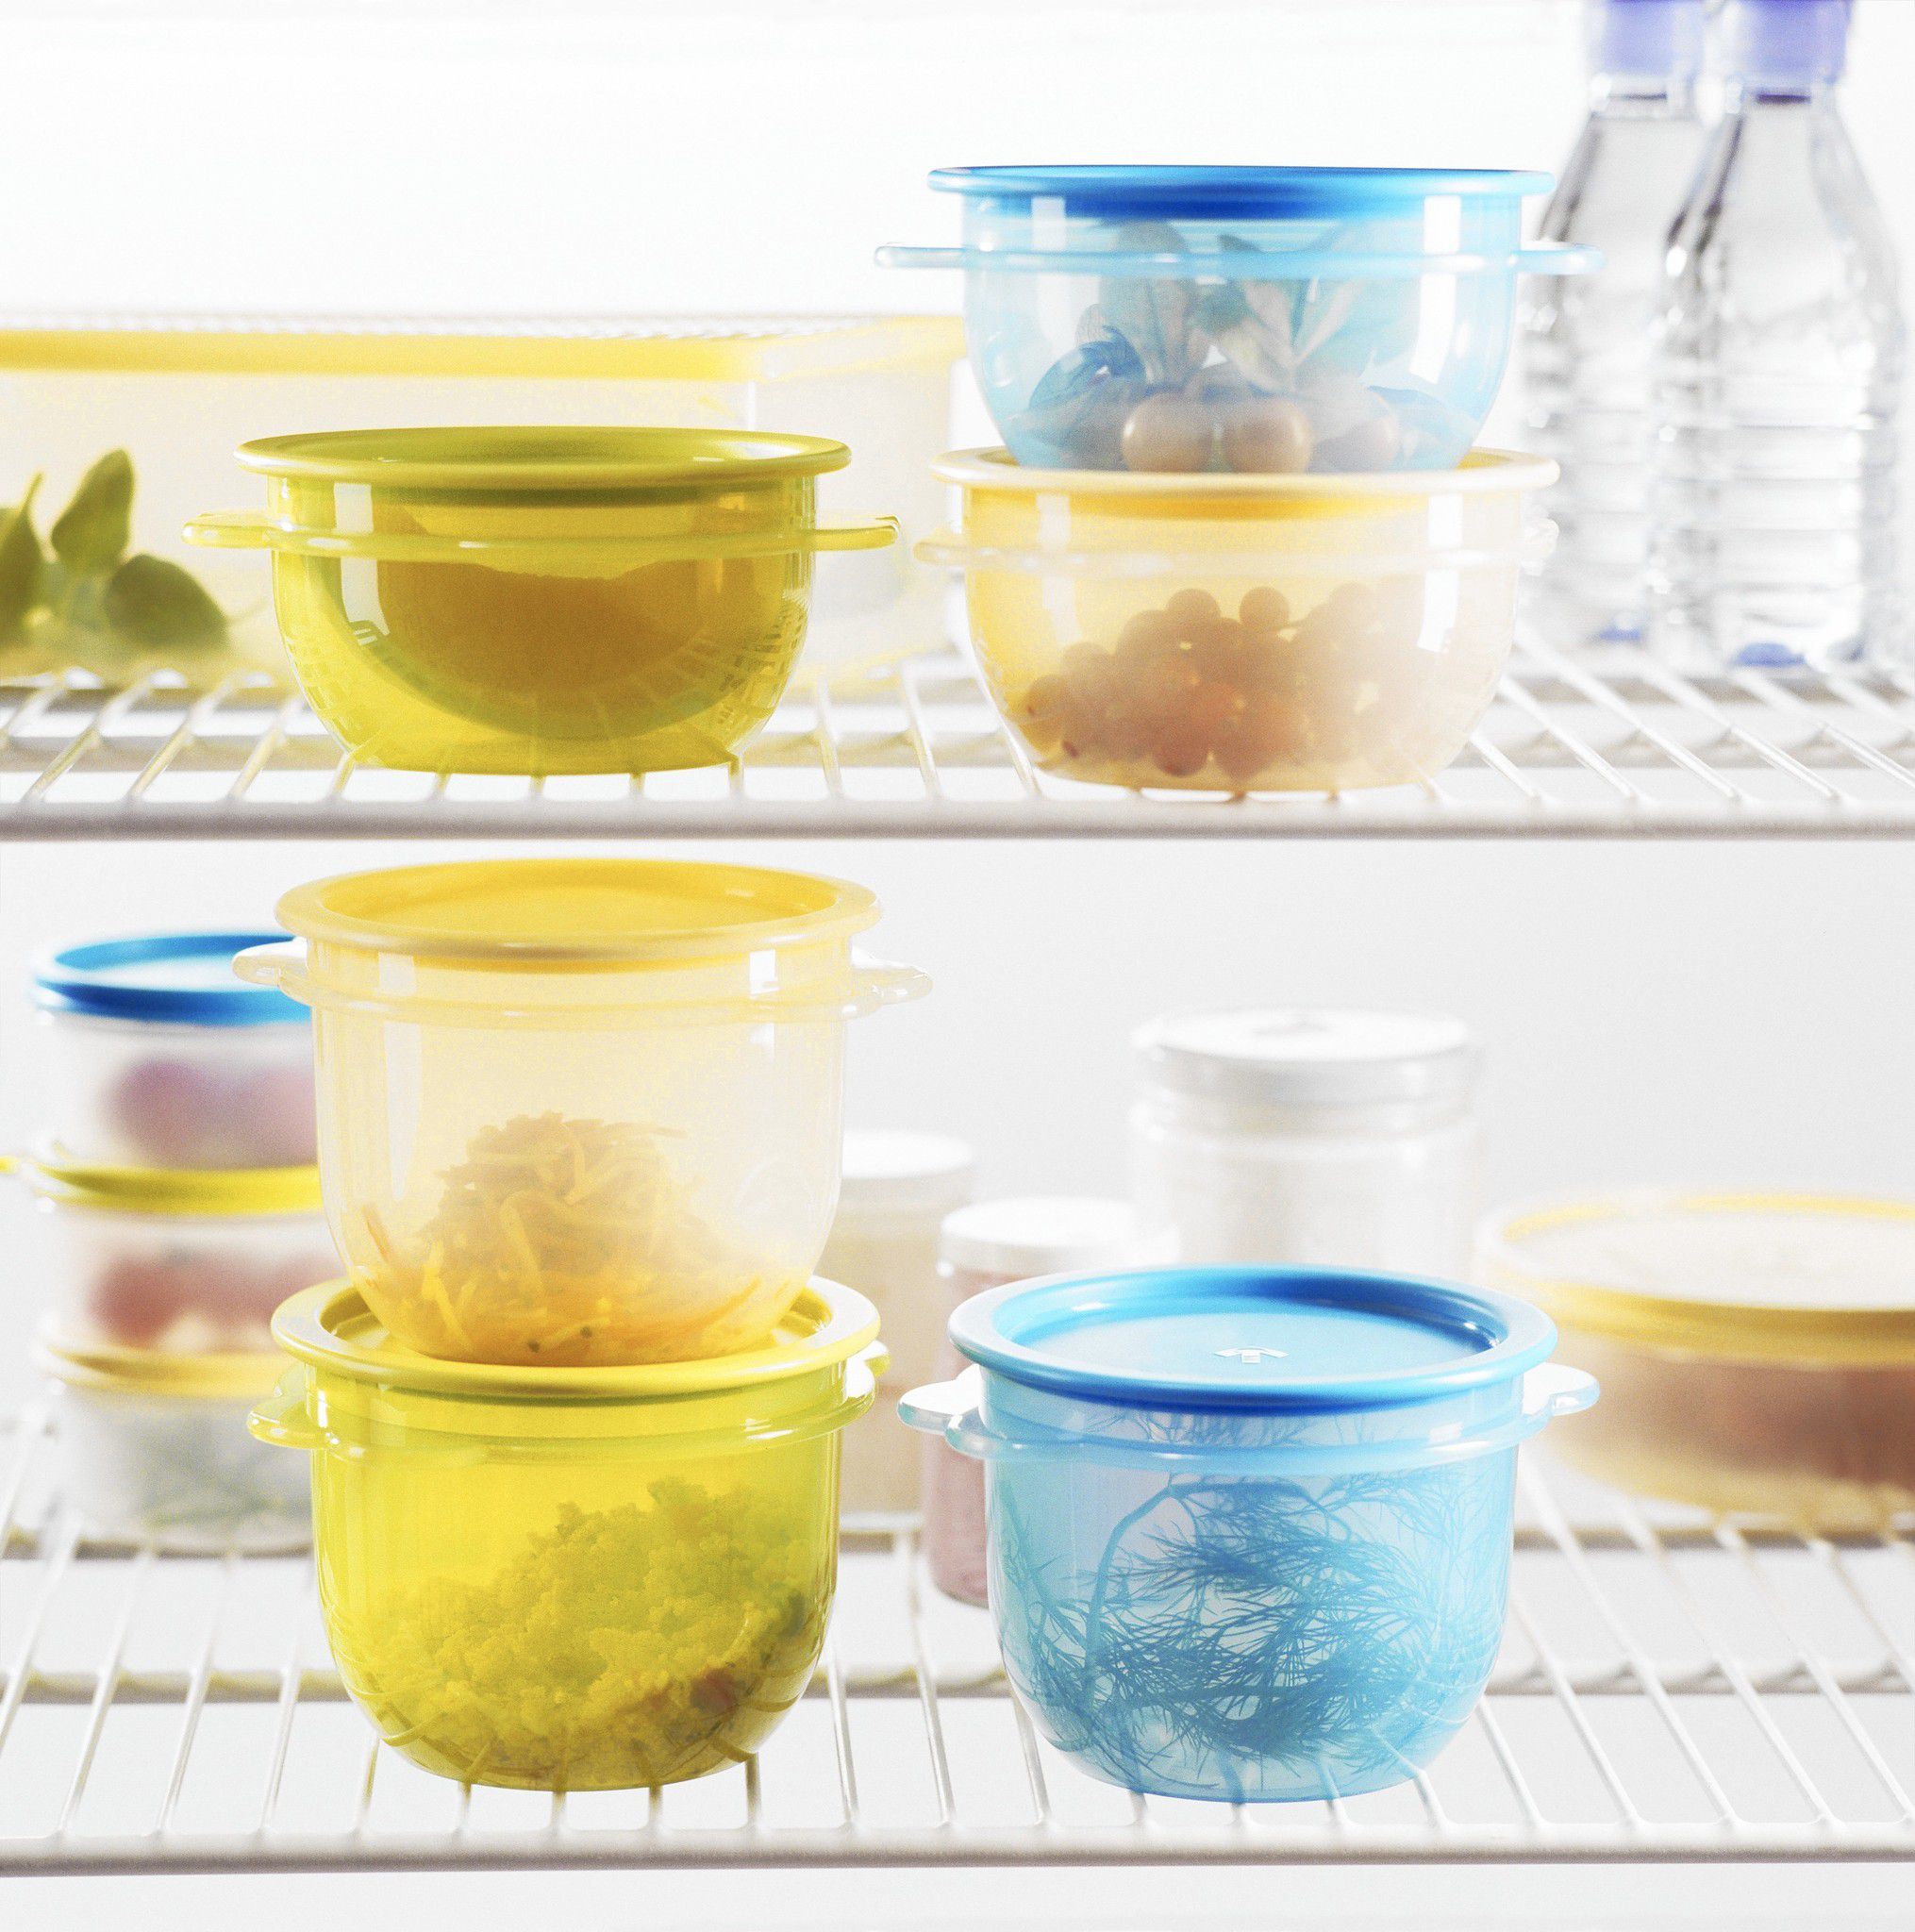 Want To Store Leftover Food Safely? Get These Premium Air Tight Containers